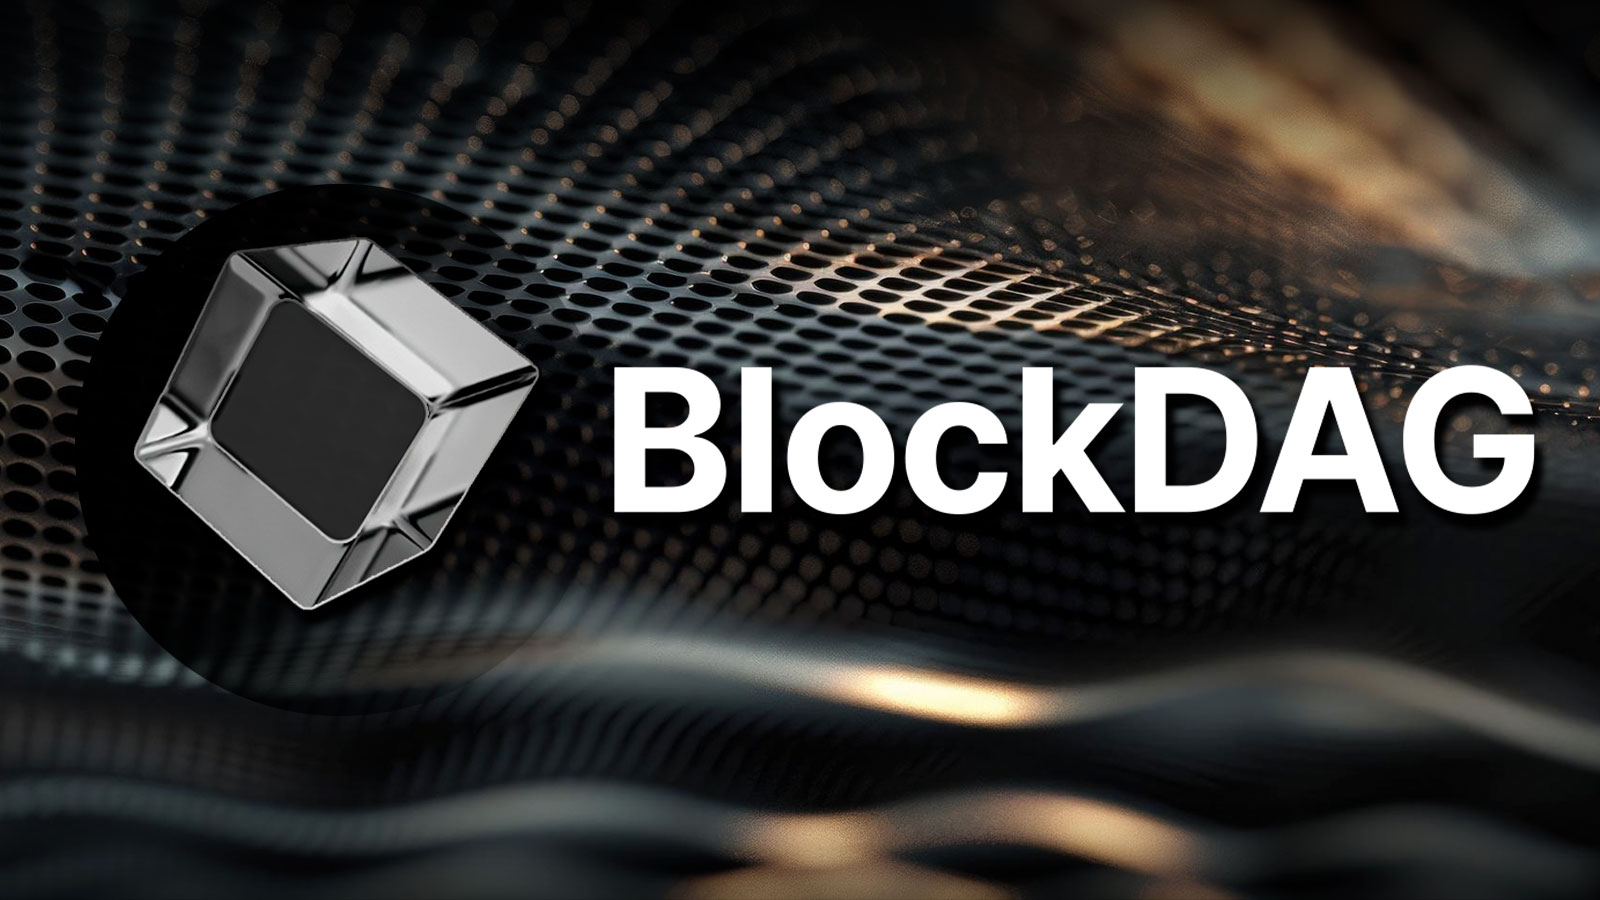 BlockDAG Introduces Low-Code and No-Code Solutions, Bitwise Awaits ETF Approval